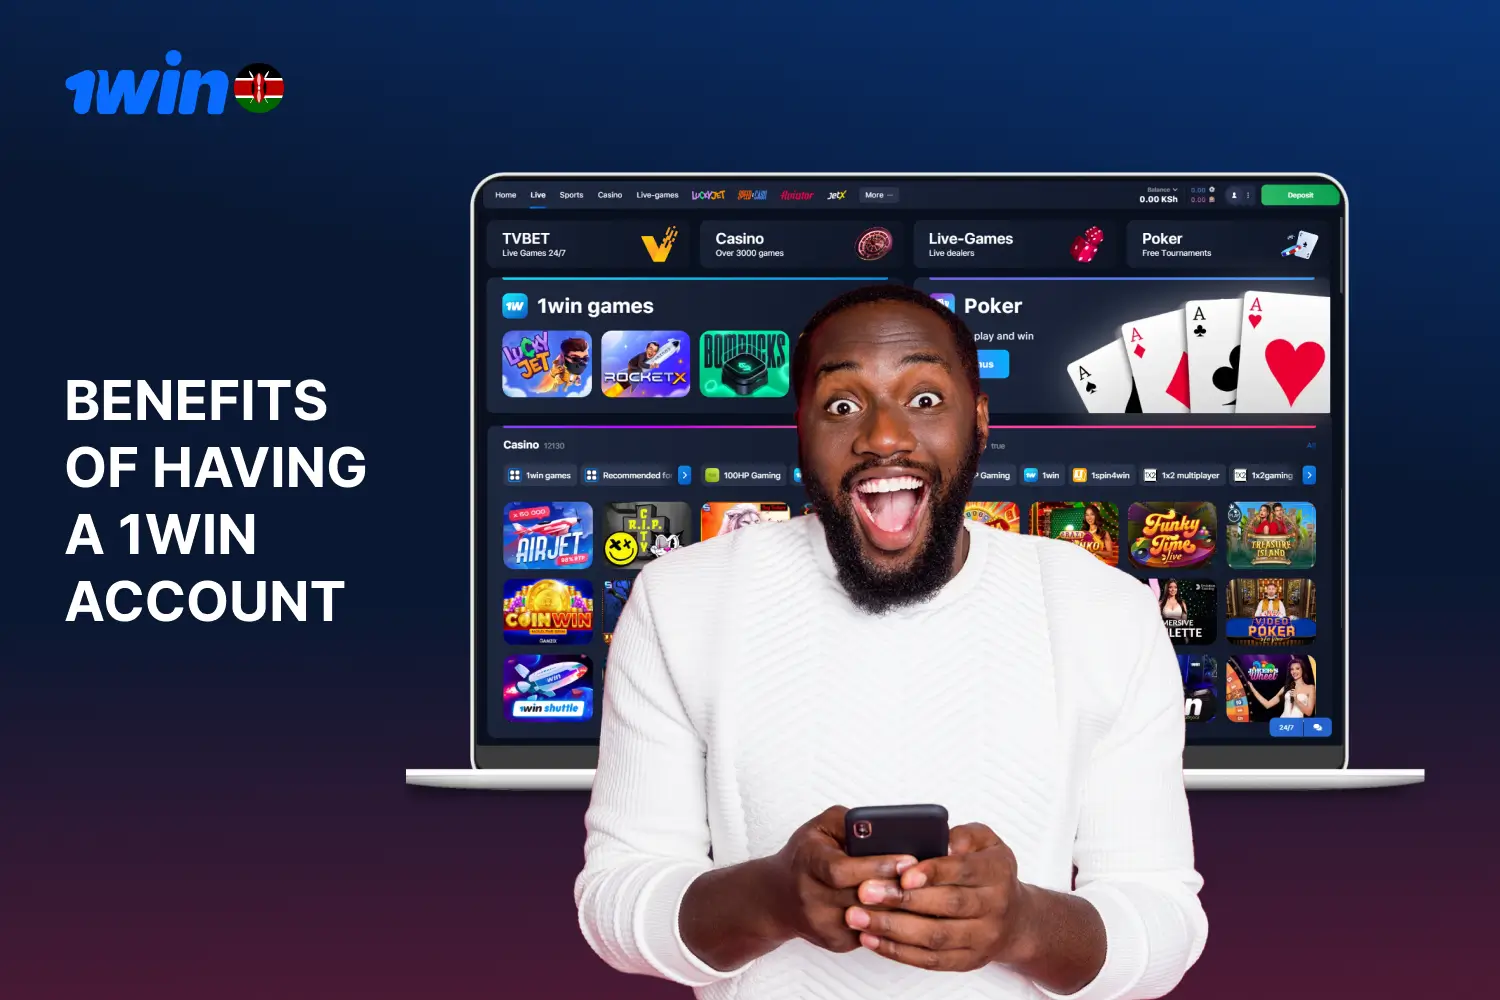 1win casino account provides many opportunities and benefits to gamblers in Kenya